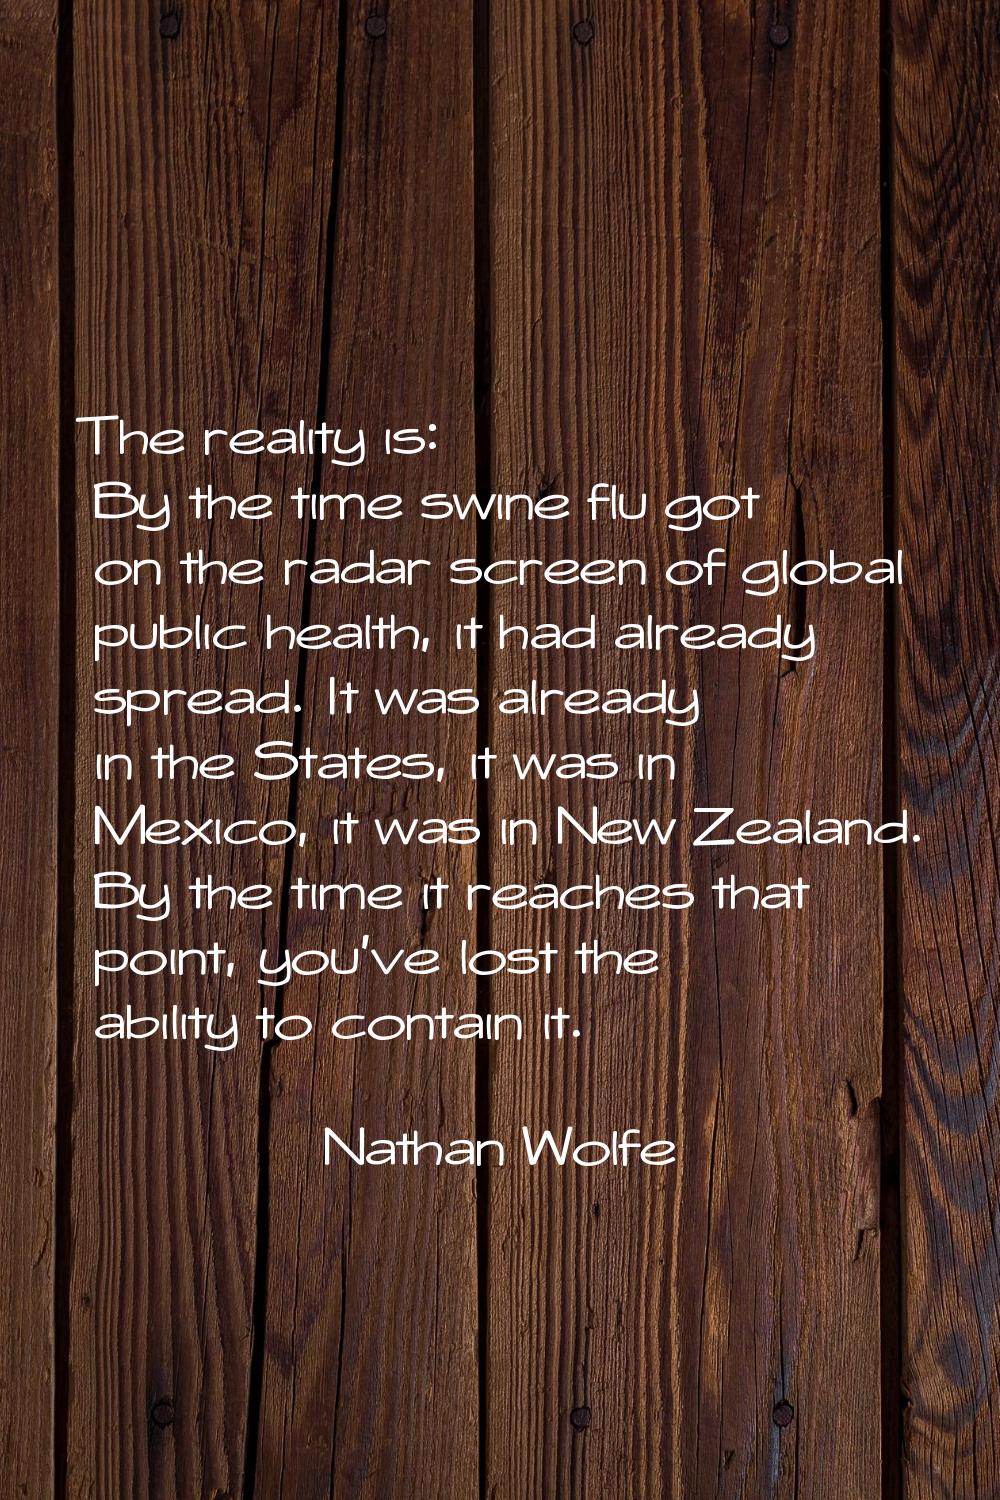 The reality is: By the time swine flu got on the radar screen of global public health, it had alrea